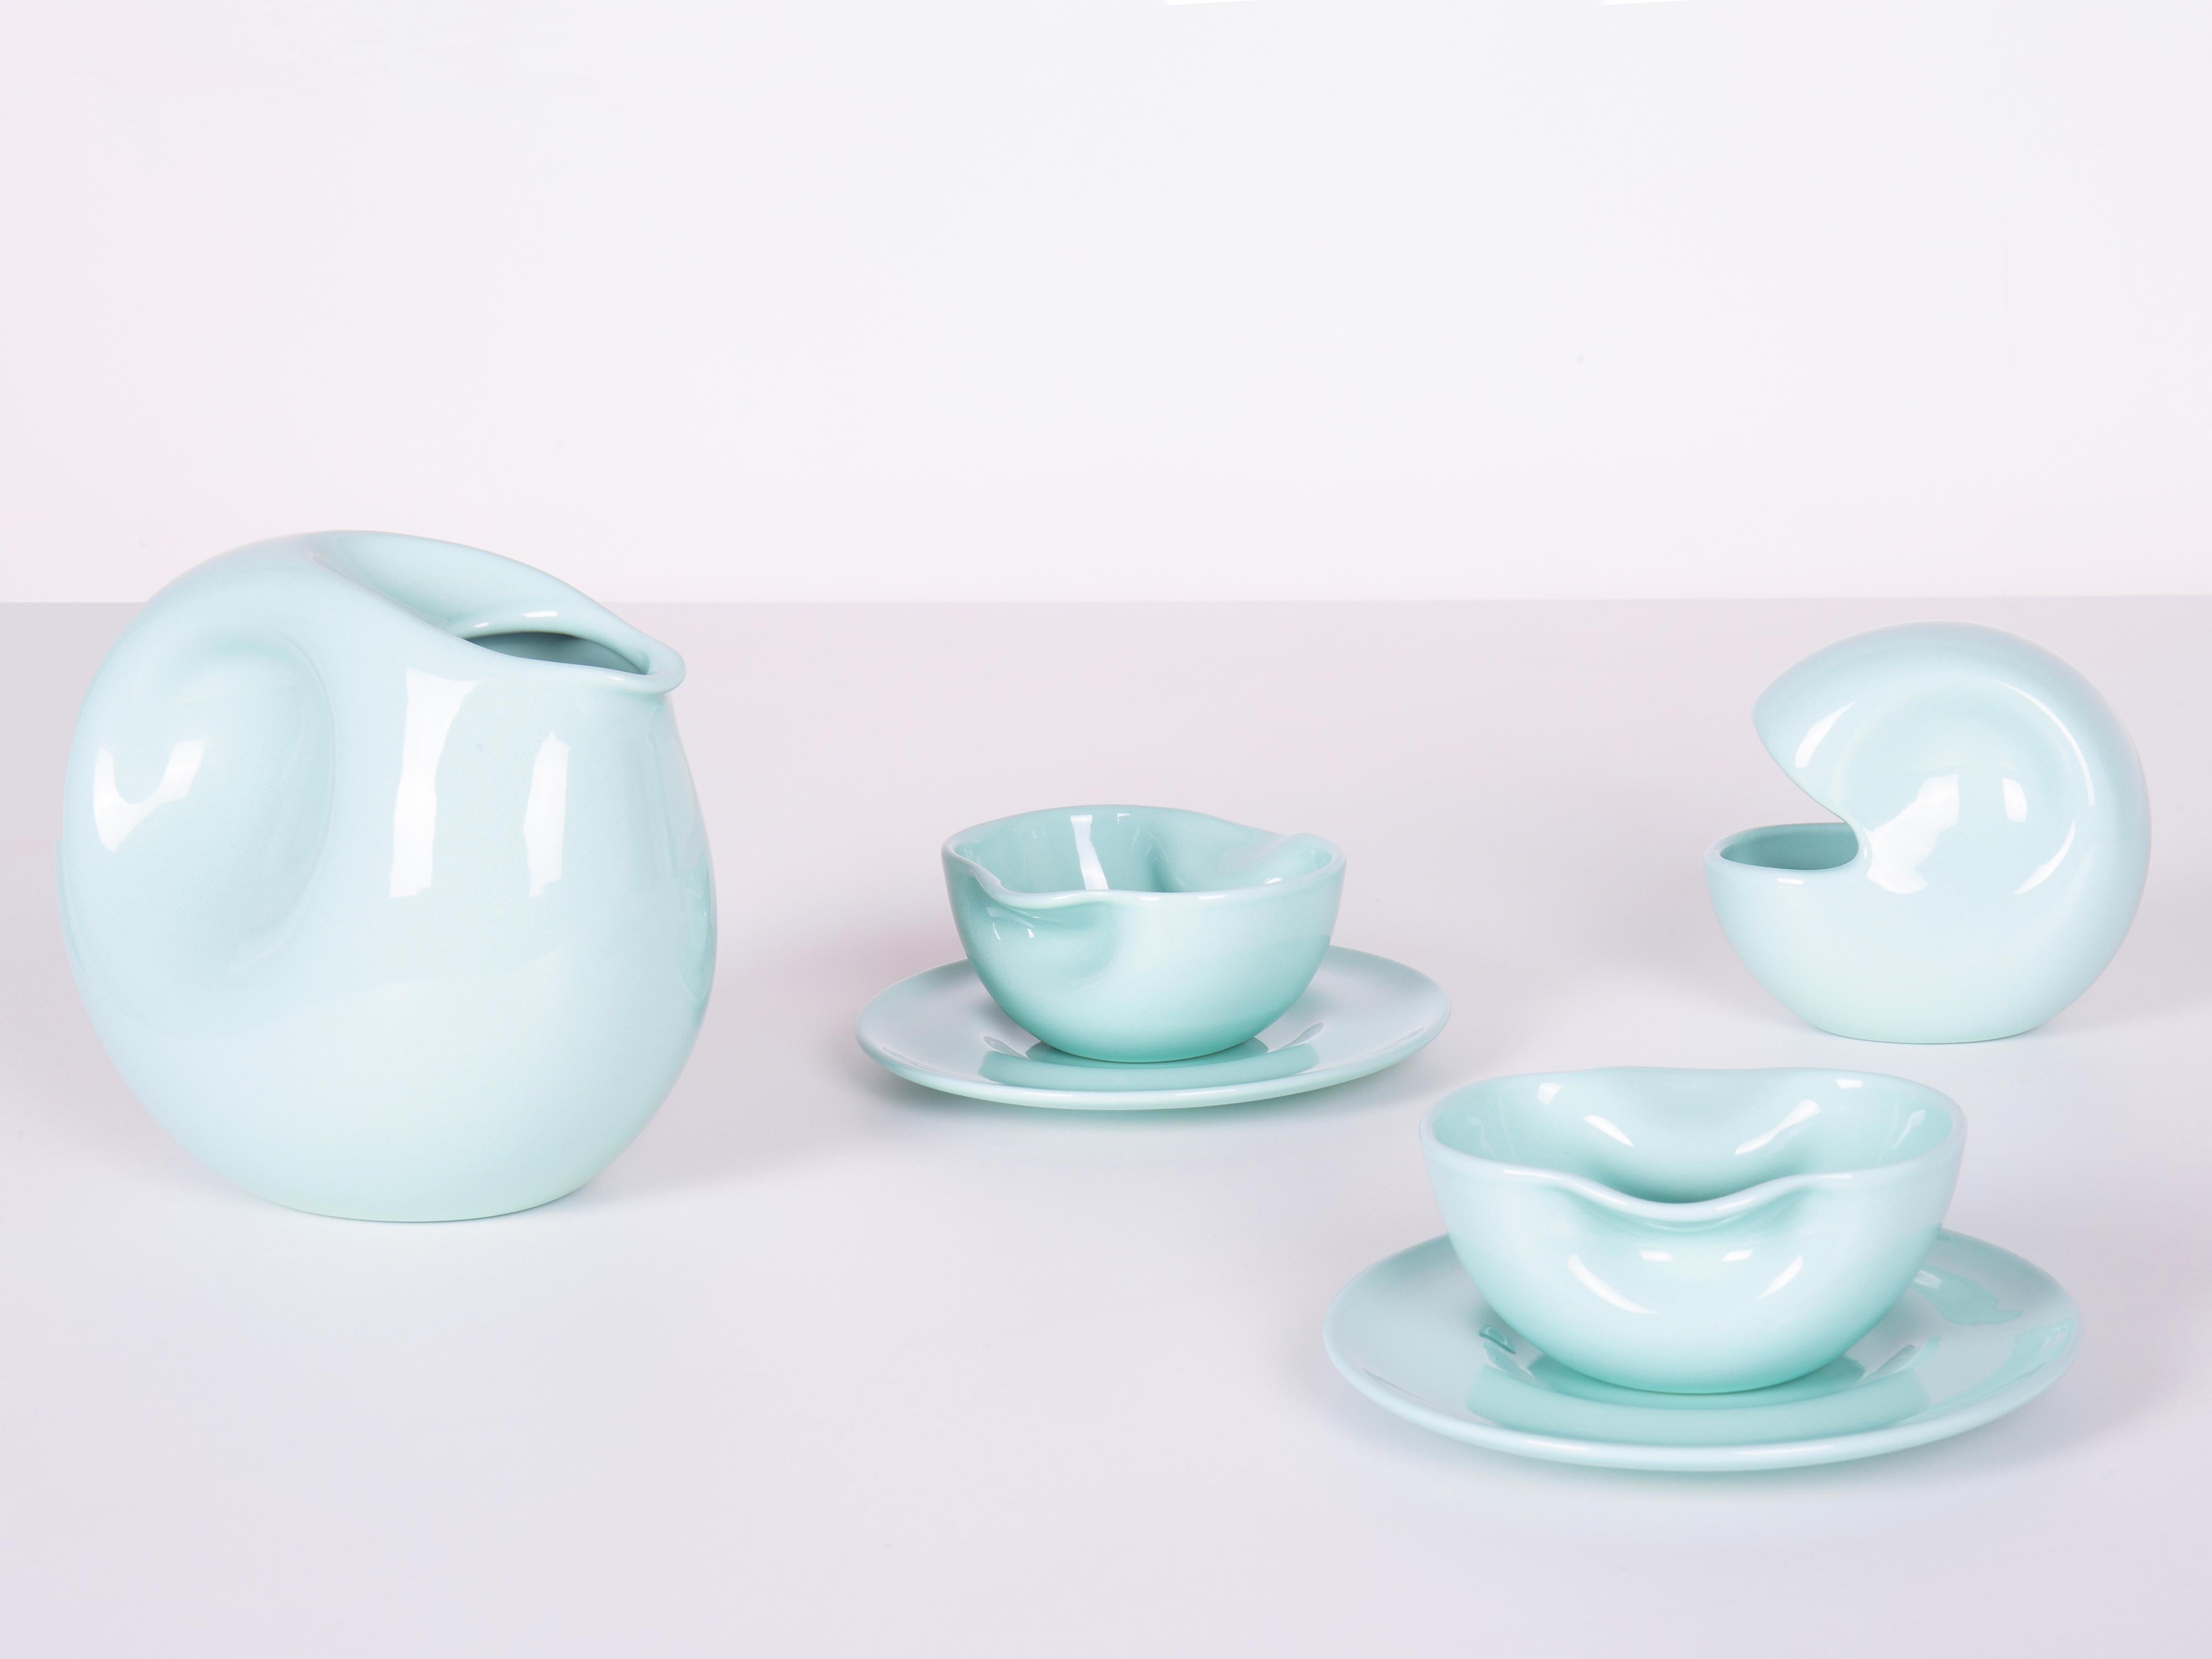 Designed in 1975 - Paradisoterrestre Edition 2023

Material: enameled pottery

Colours: mint green; also available in white or pink.

The tea set designed by Italian artist Augusto Betti in 1975 consists of 1 teapot, 1 sugar bowl, 2 cups and 2